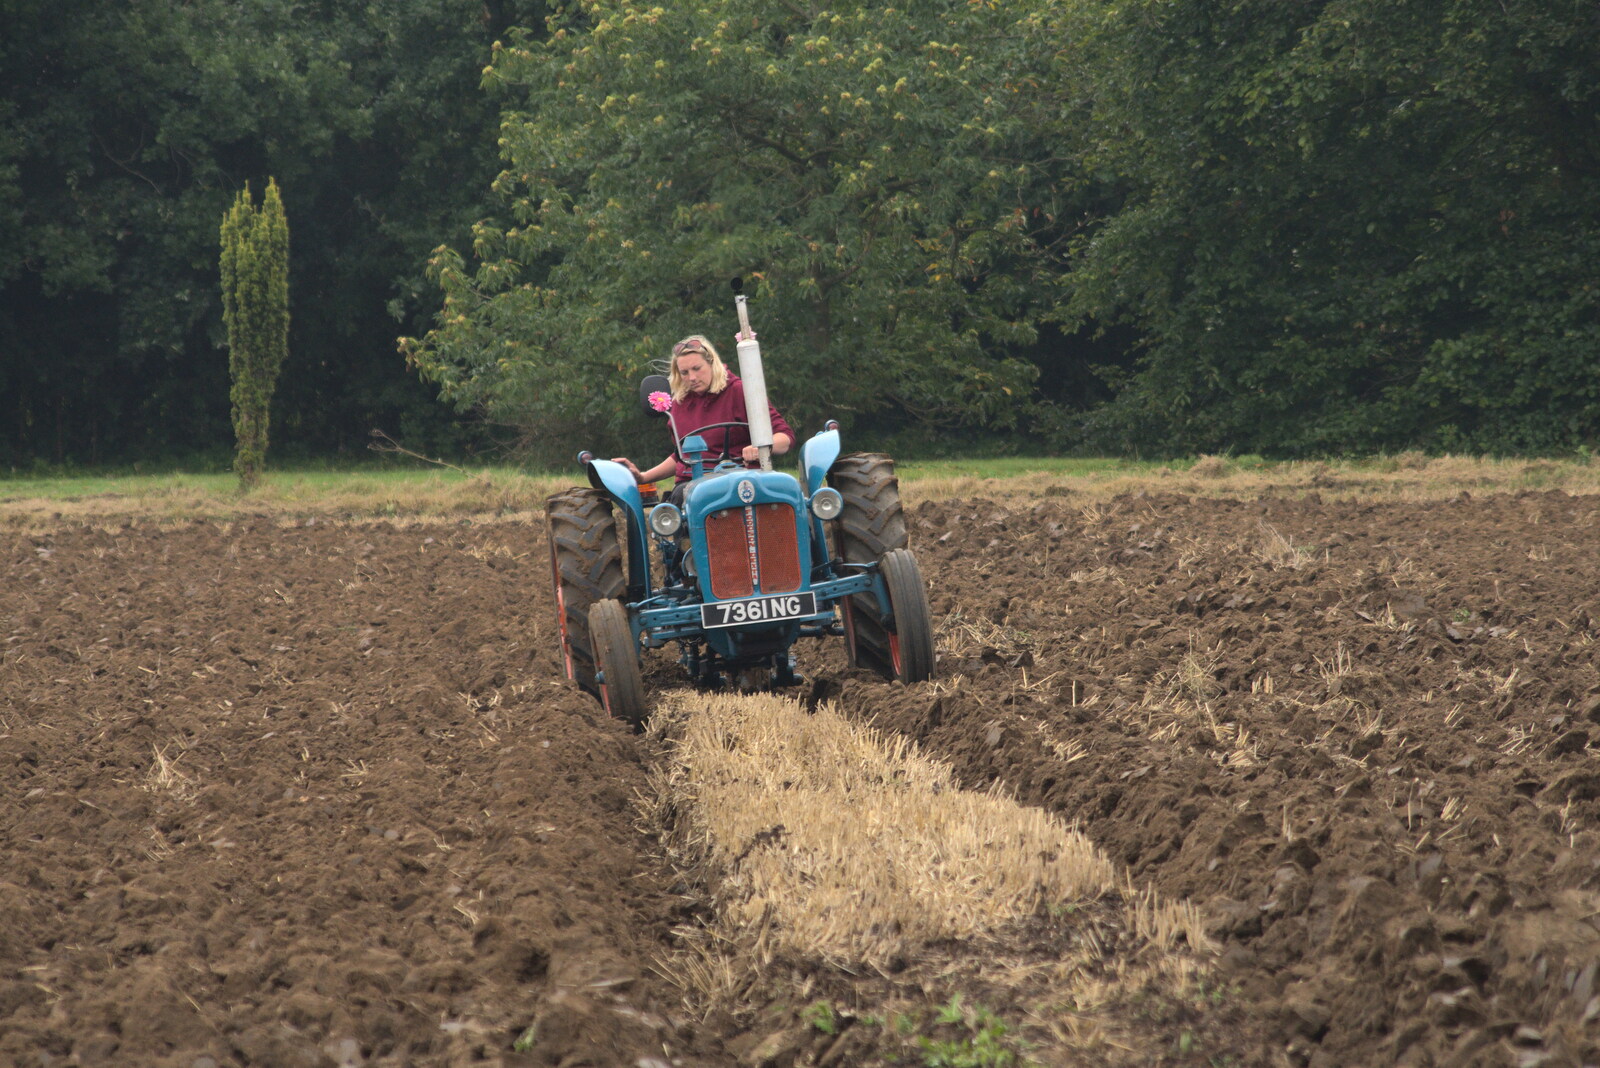 A Fordson does some ploughing from Vintage Tractor Ploughing, Thrandeston, Suffolk - 26th September 2021